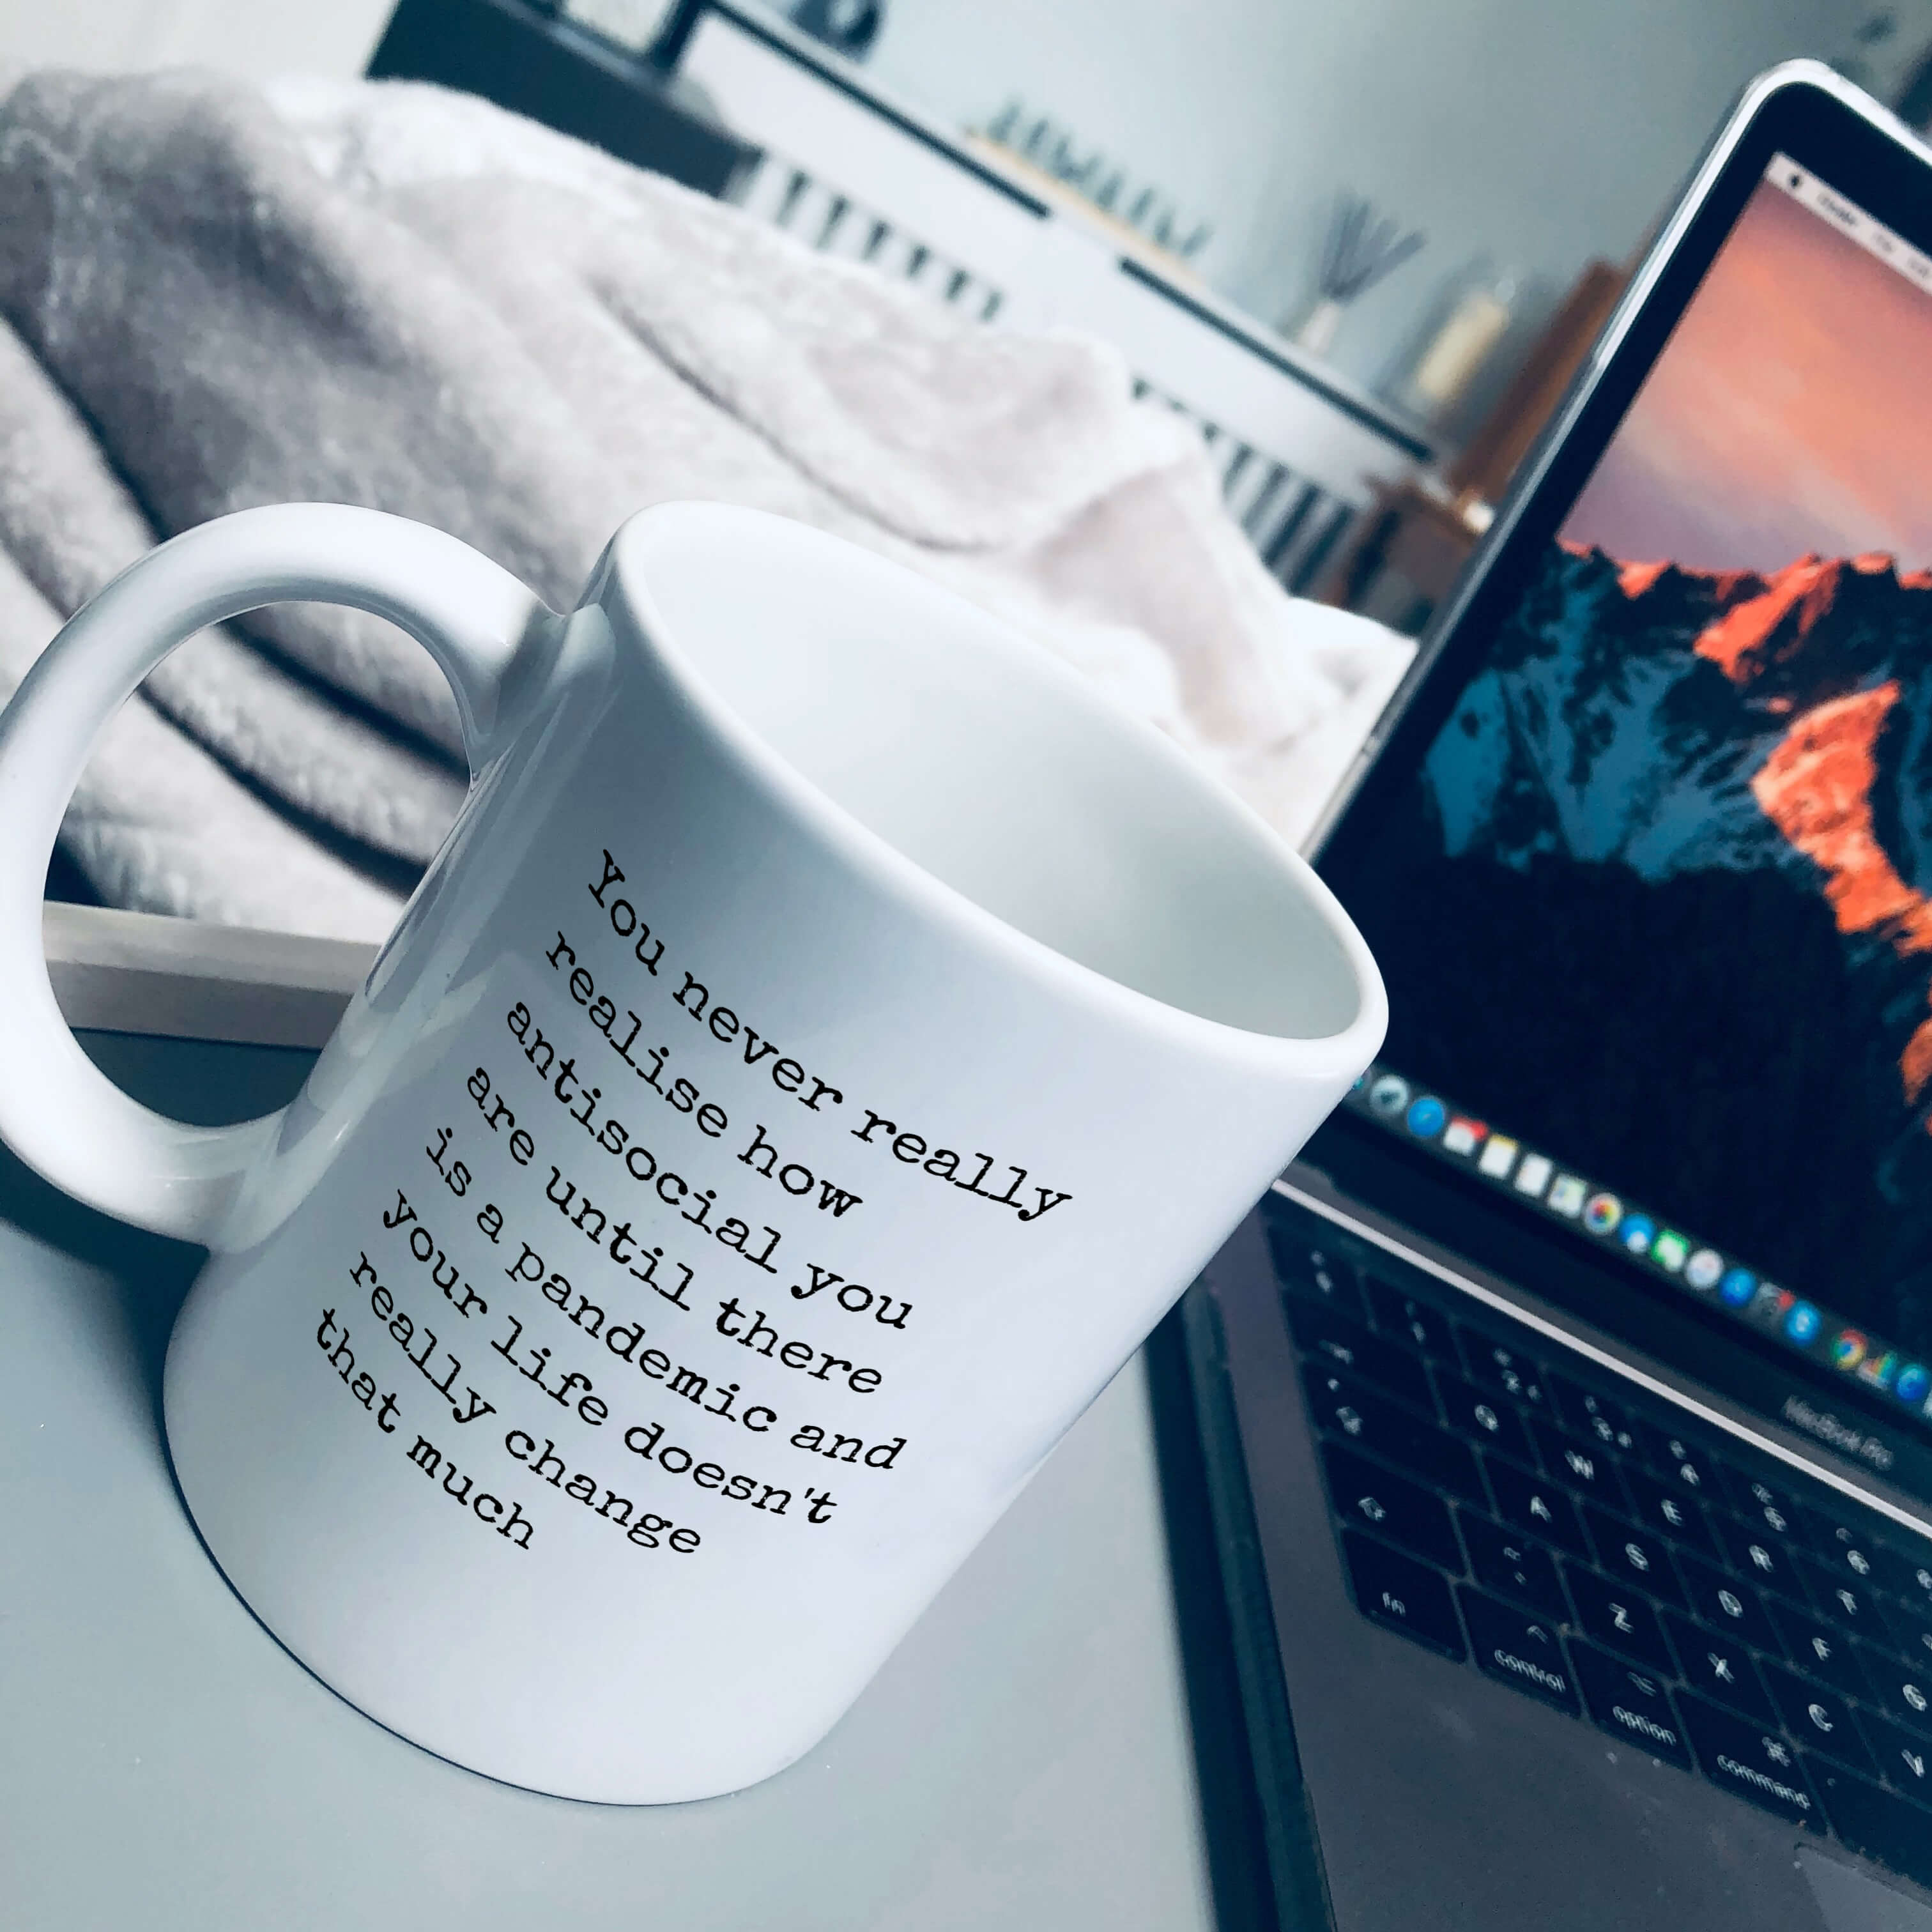 Mug that says in typewriter font: You never really realise how antisocial you are until there is a pandemic and your life doesn’t really change that much